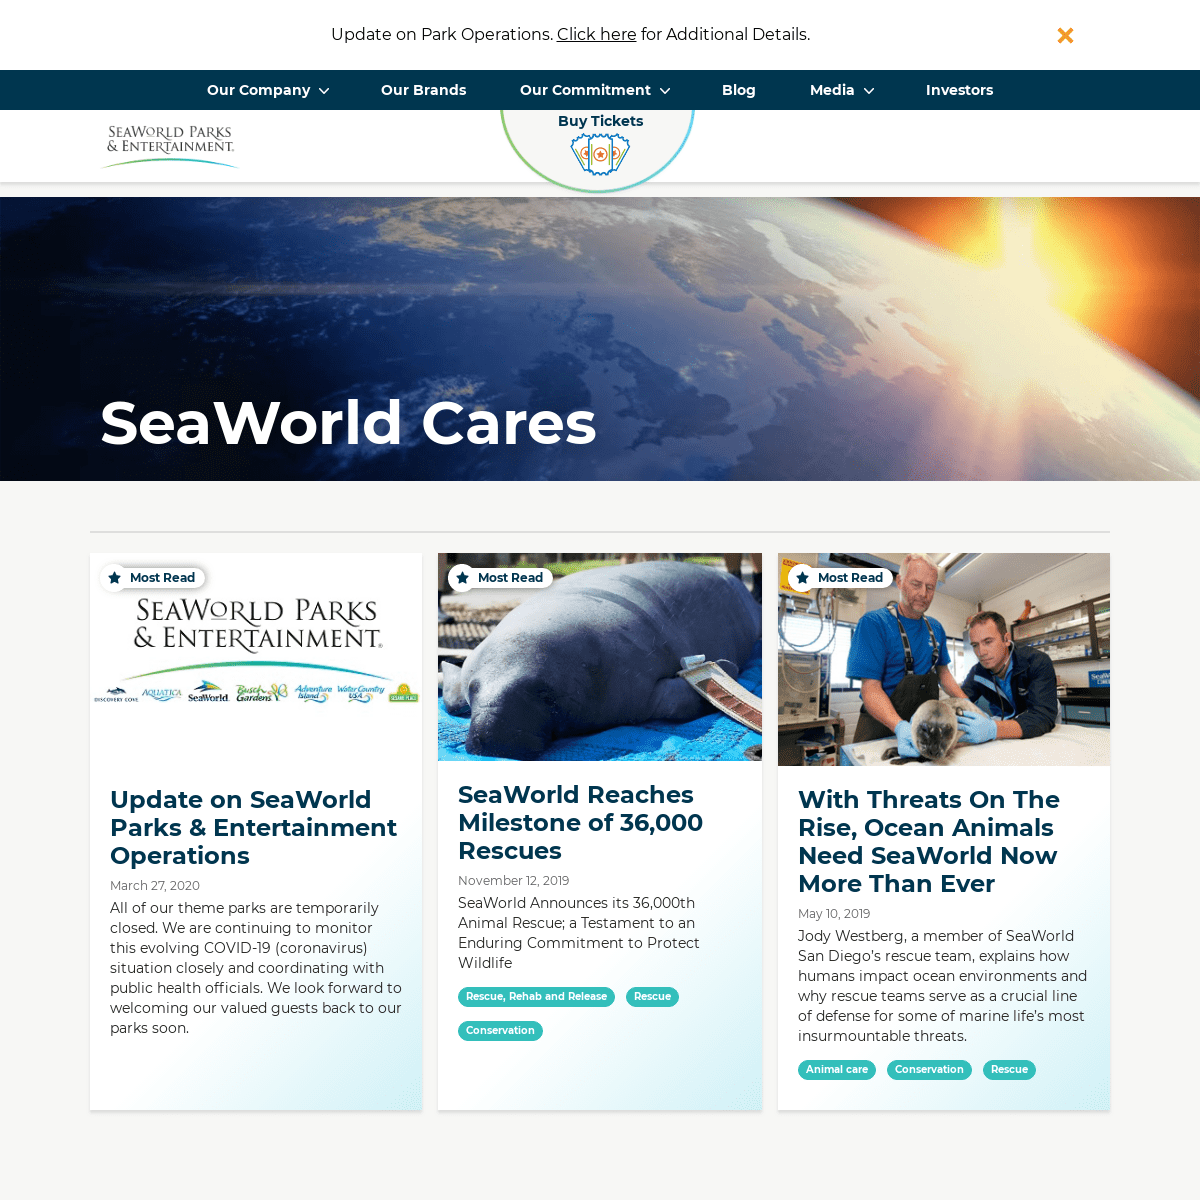 A complete backup of seaworldcares.com